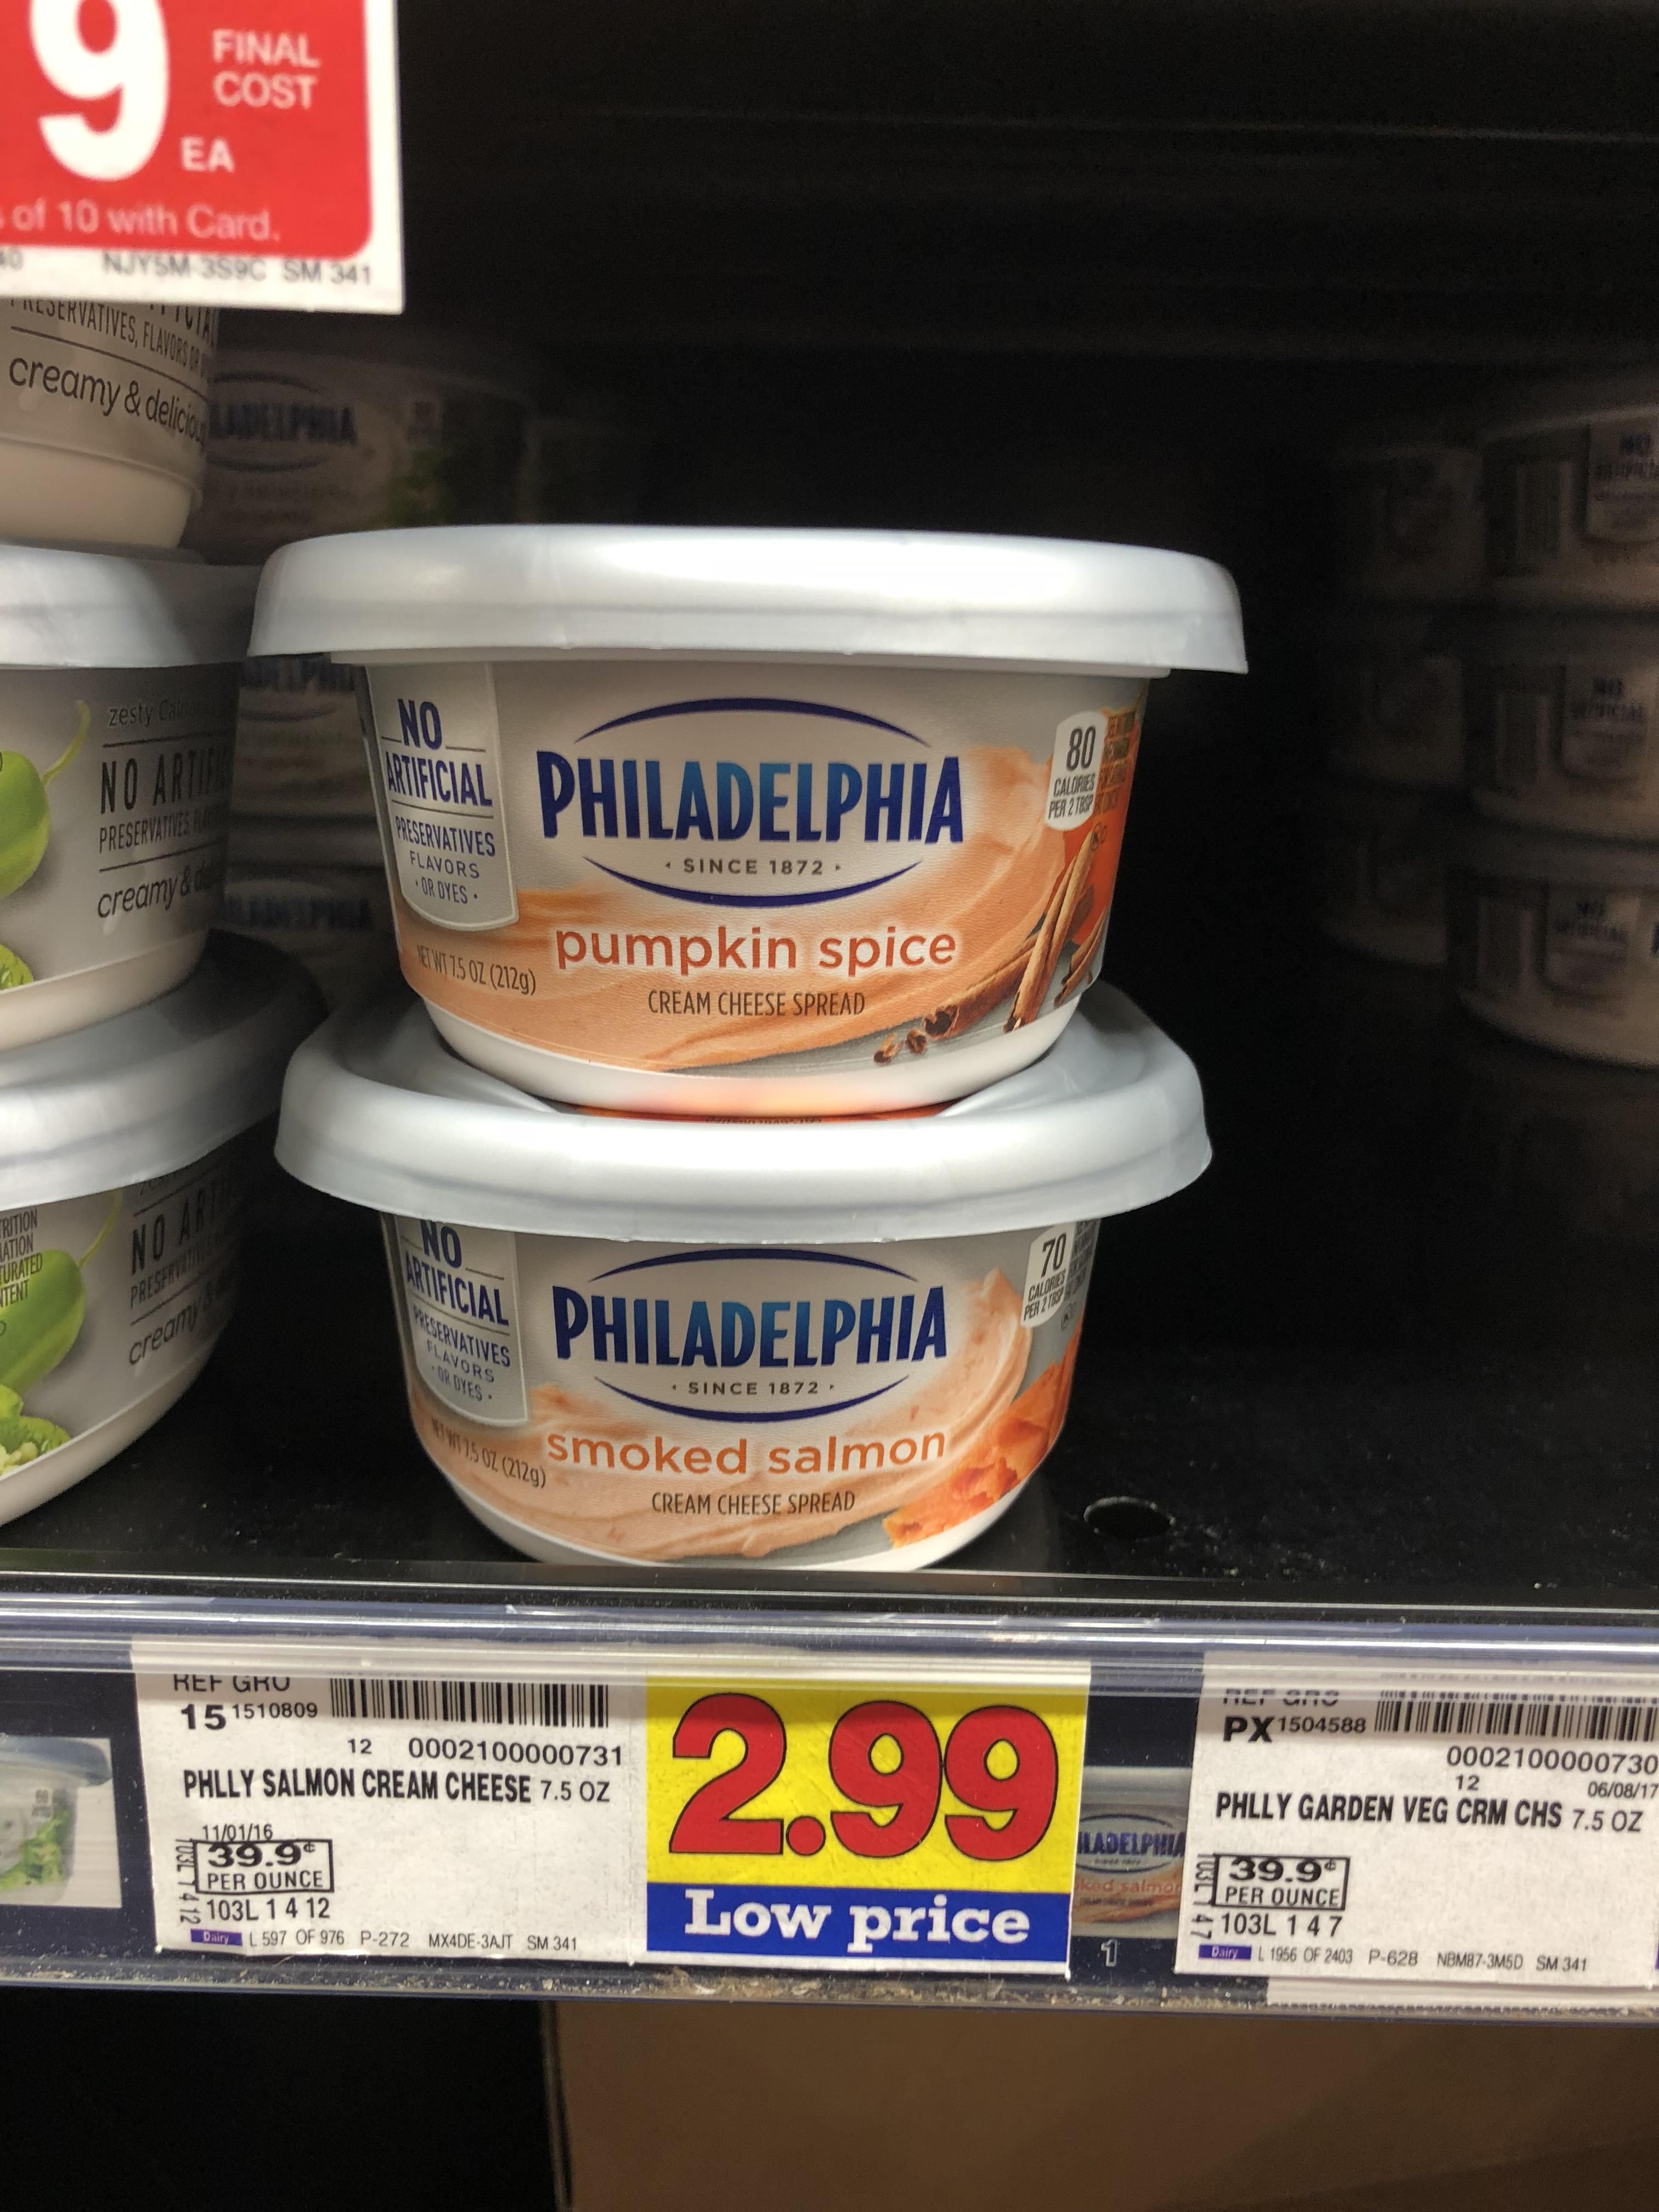 Be sure to pay attention when grabbing cream cheese this holiday season.